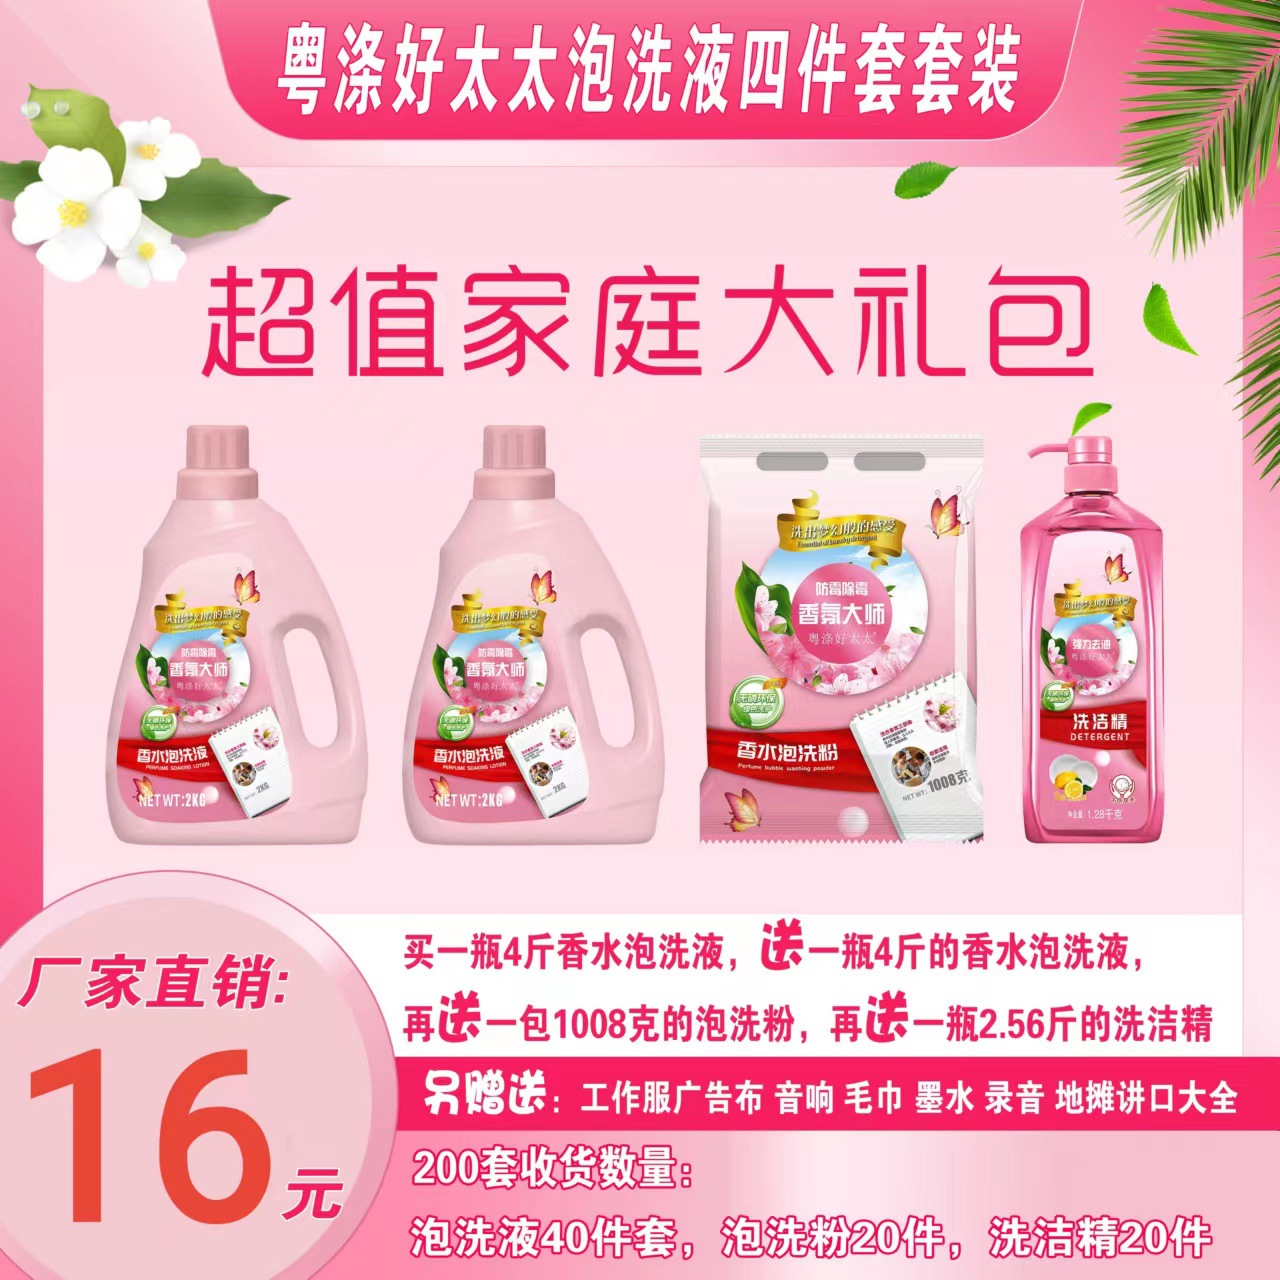 Stall Fair Hot Selling Laundry Detergent Four-Piece Set Laundry Detergent Detergent Six-Piece Laundry Detergent Five-Piece Set